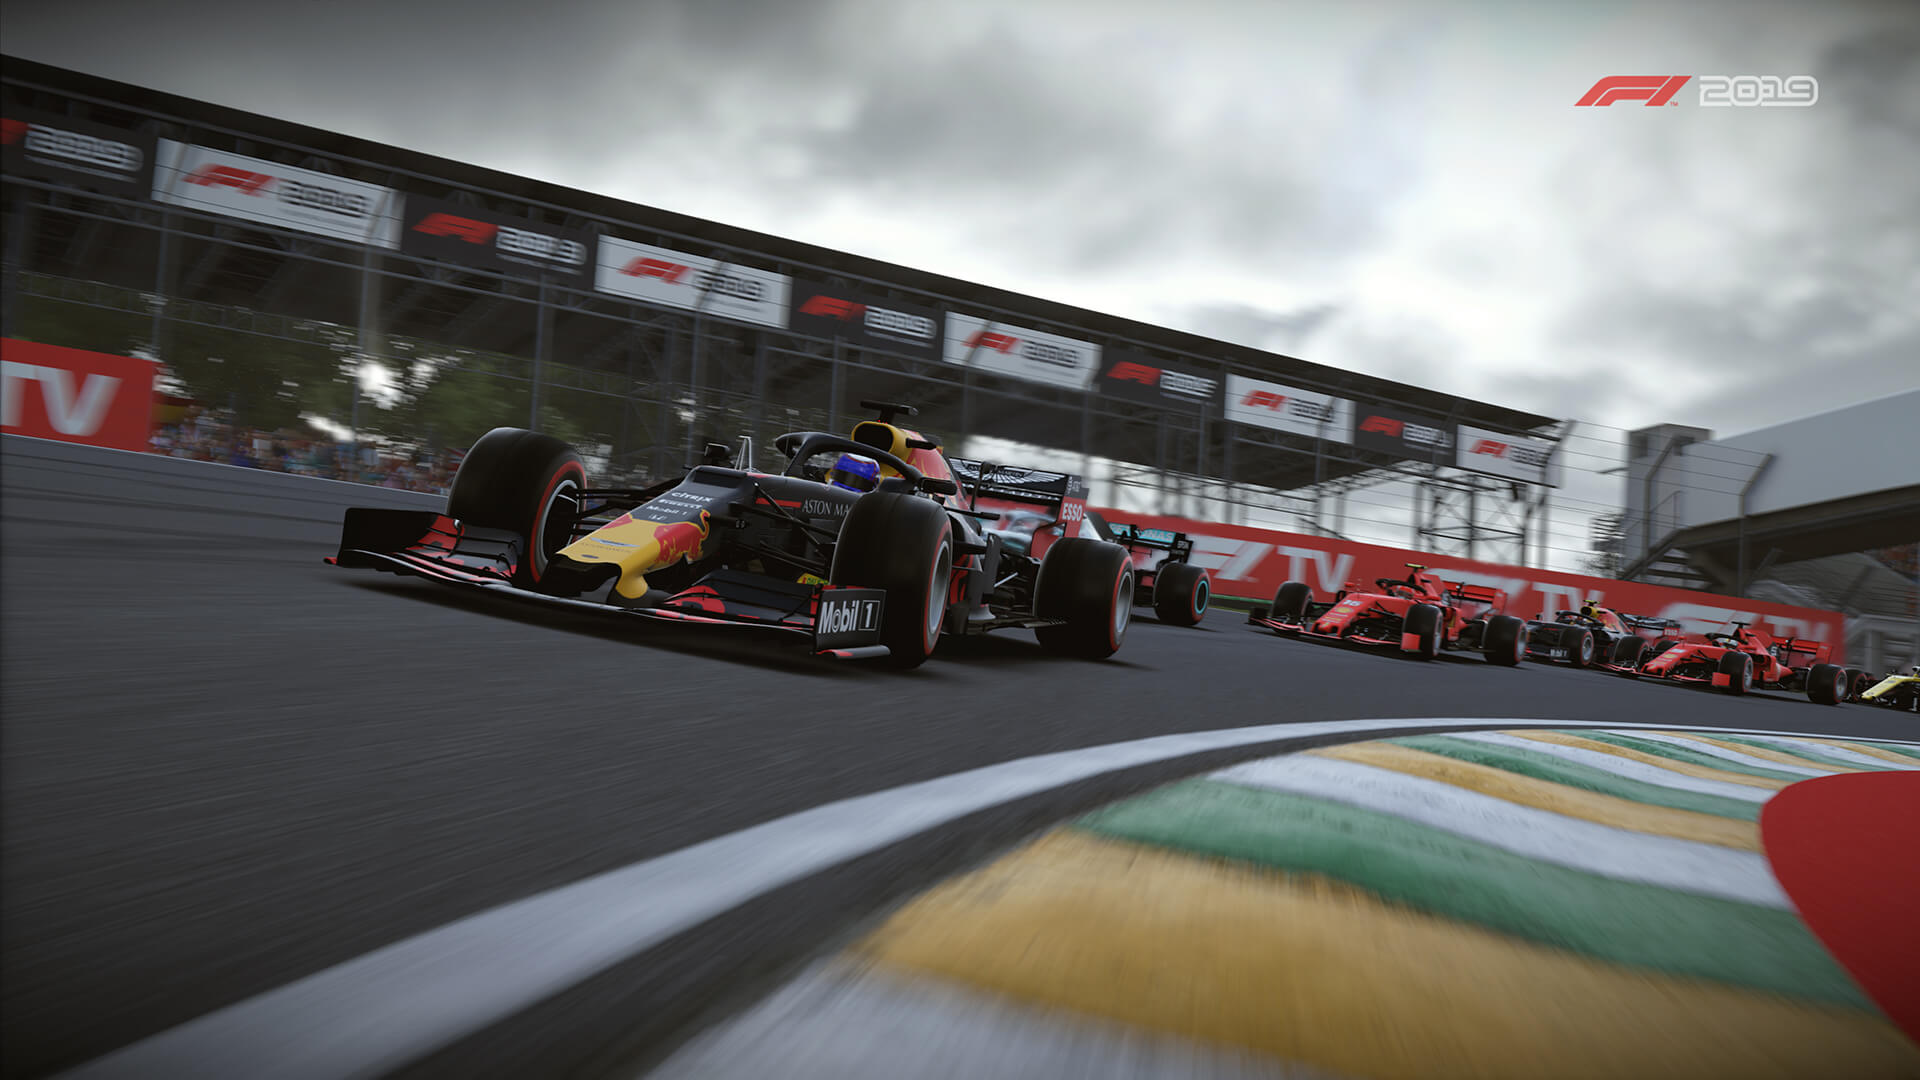 blozen geloof Wonen F1 2019 Now Available to Stream on PlayStation Now – GTPlanet